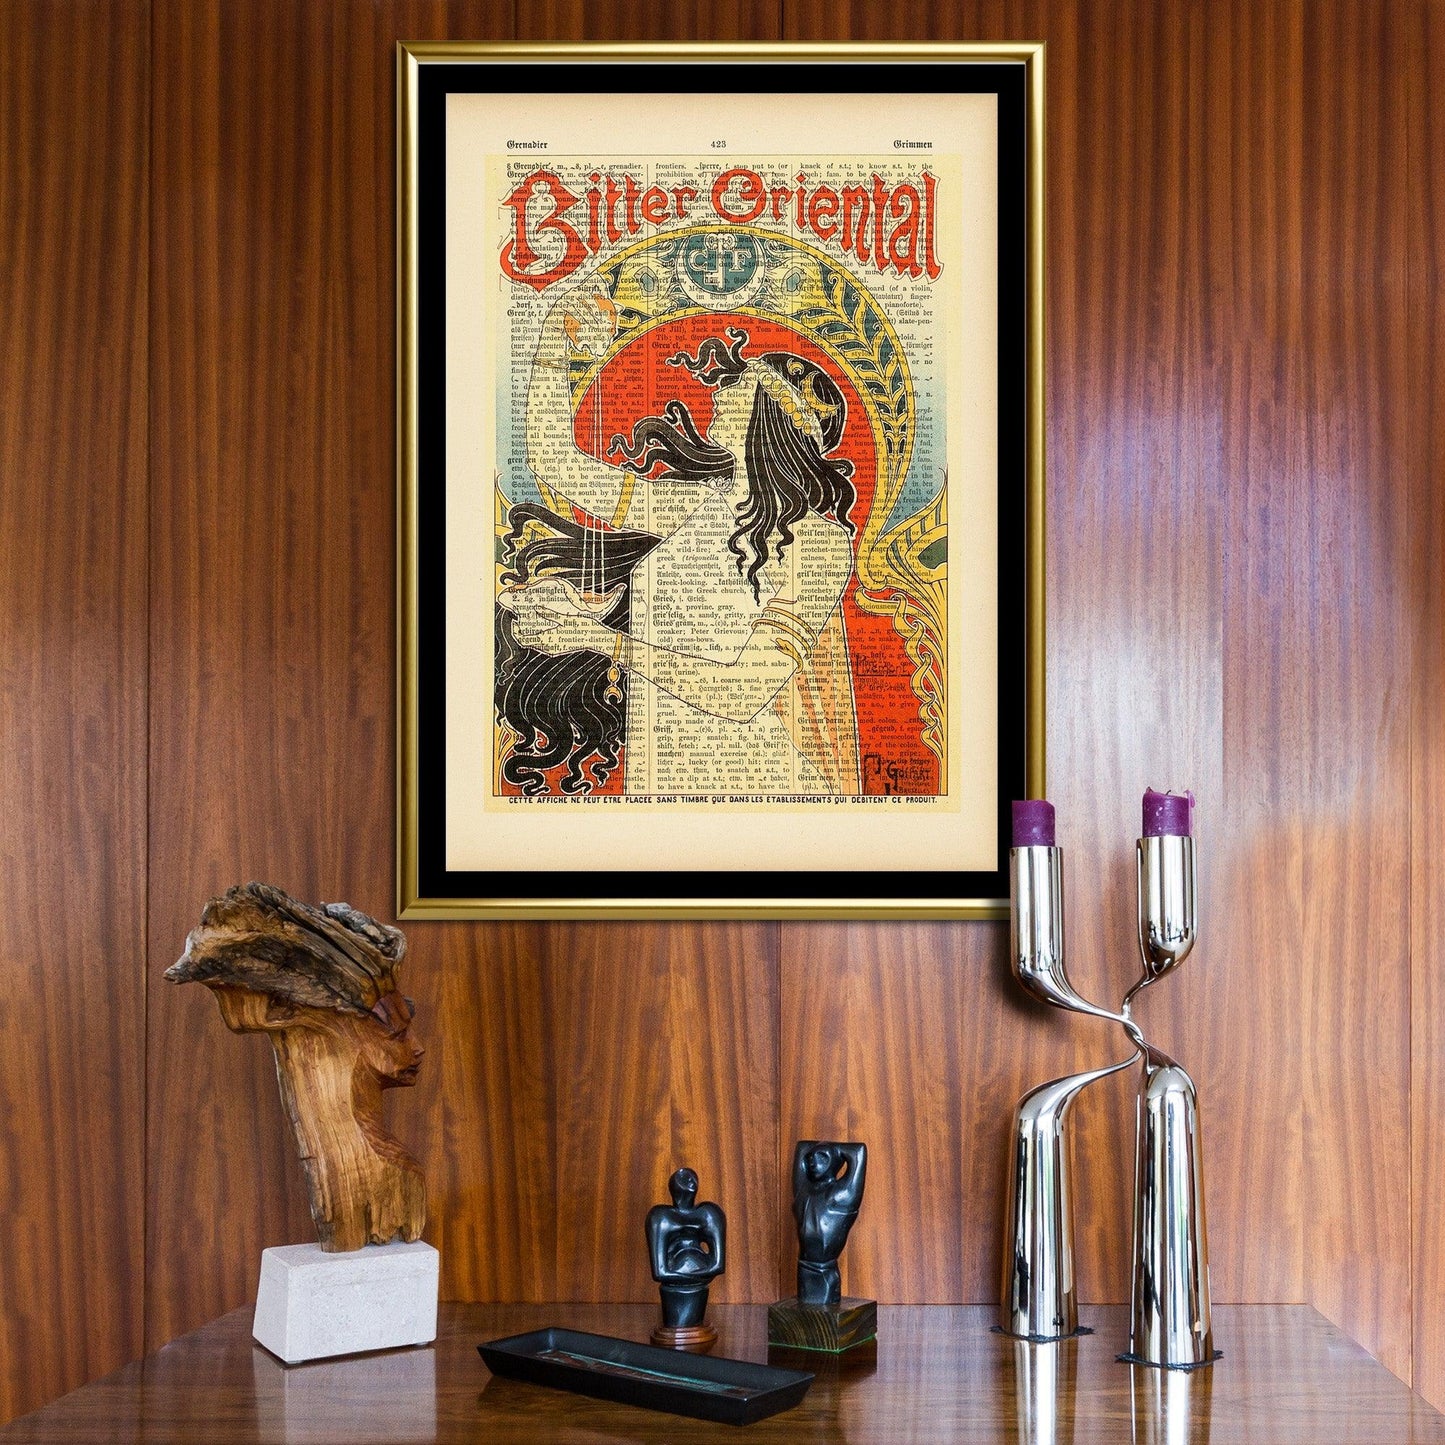 Give your home decor a touch of elegance through our exquisite Bitter Oriental reproduction poster. The artwork is a collage with the advertising poster design Privat Livemont (Belgian graphic designer, 1861-1936). Year of created 1897.